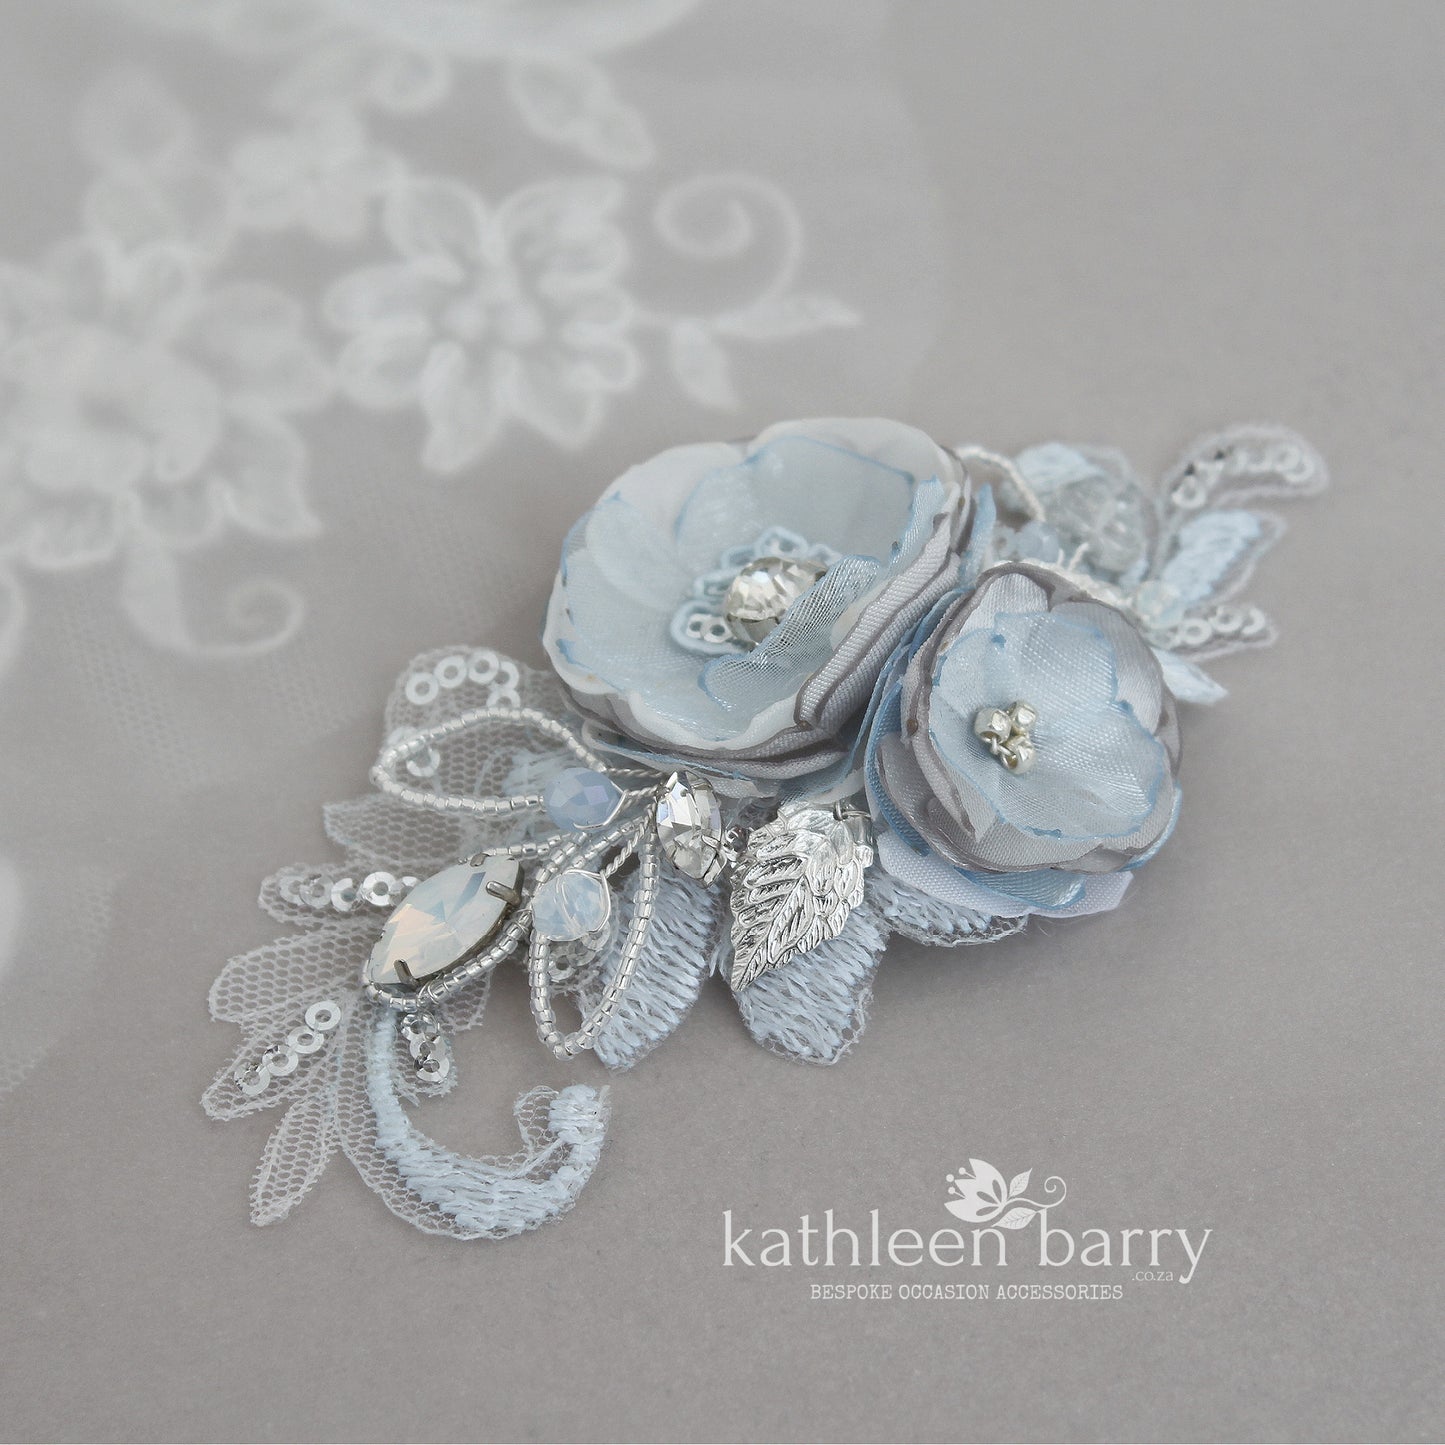 Shauna floral lace hair clip - Silver grey and pale blue, opalecent crystals (colors on request)